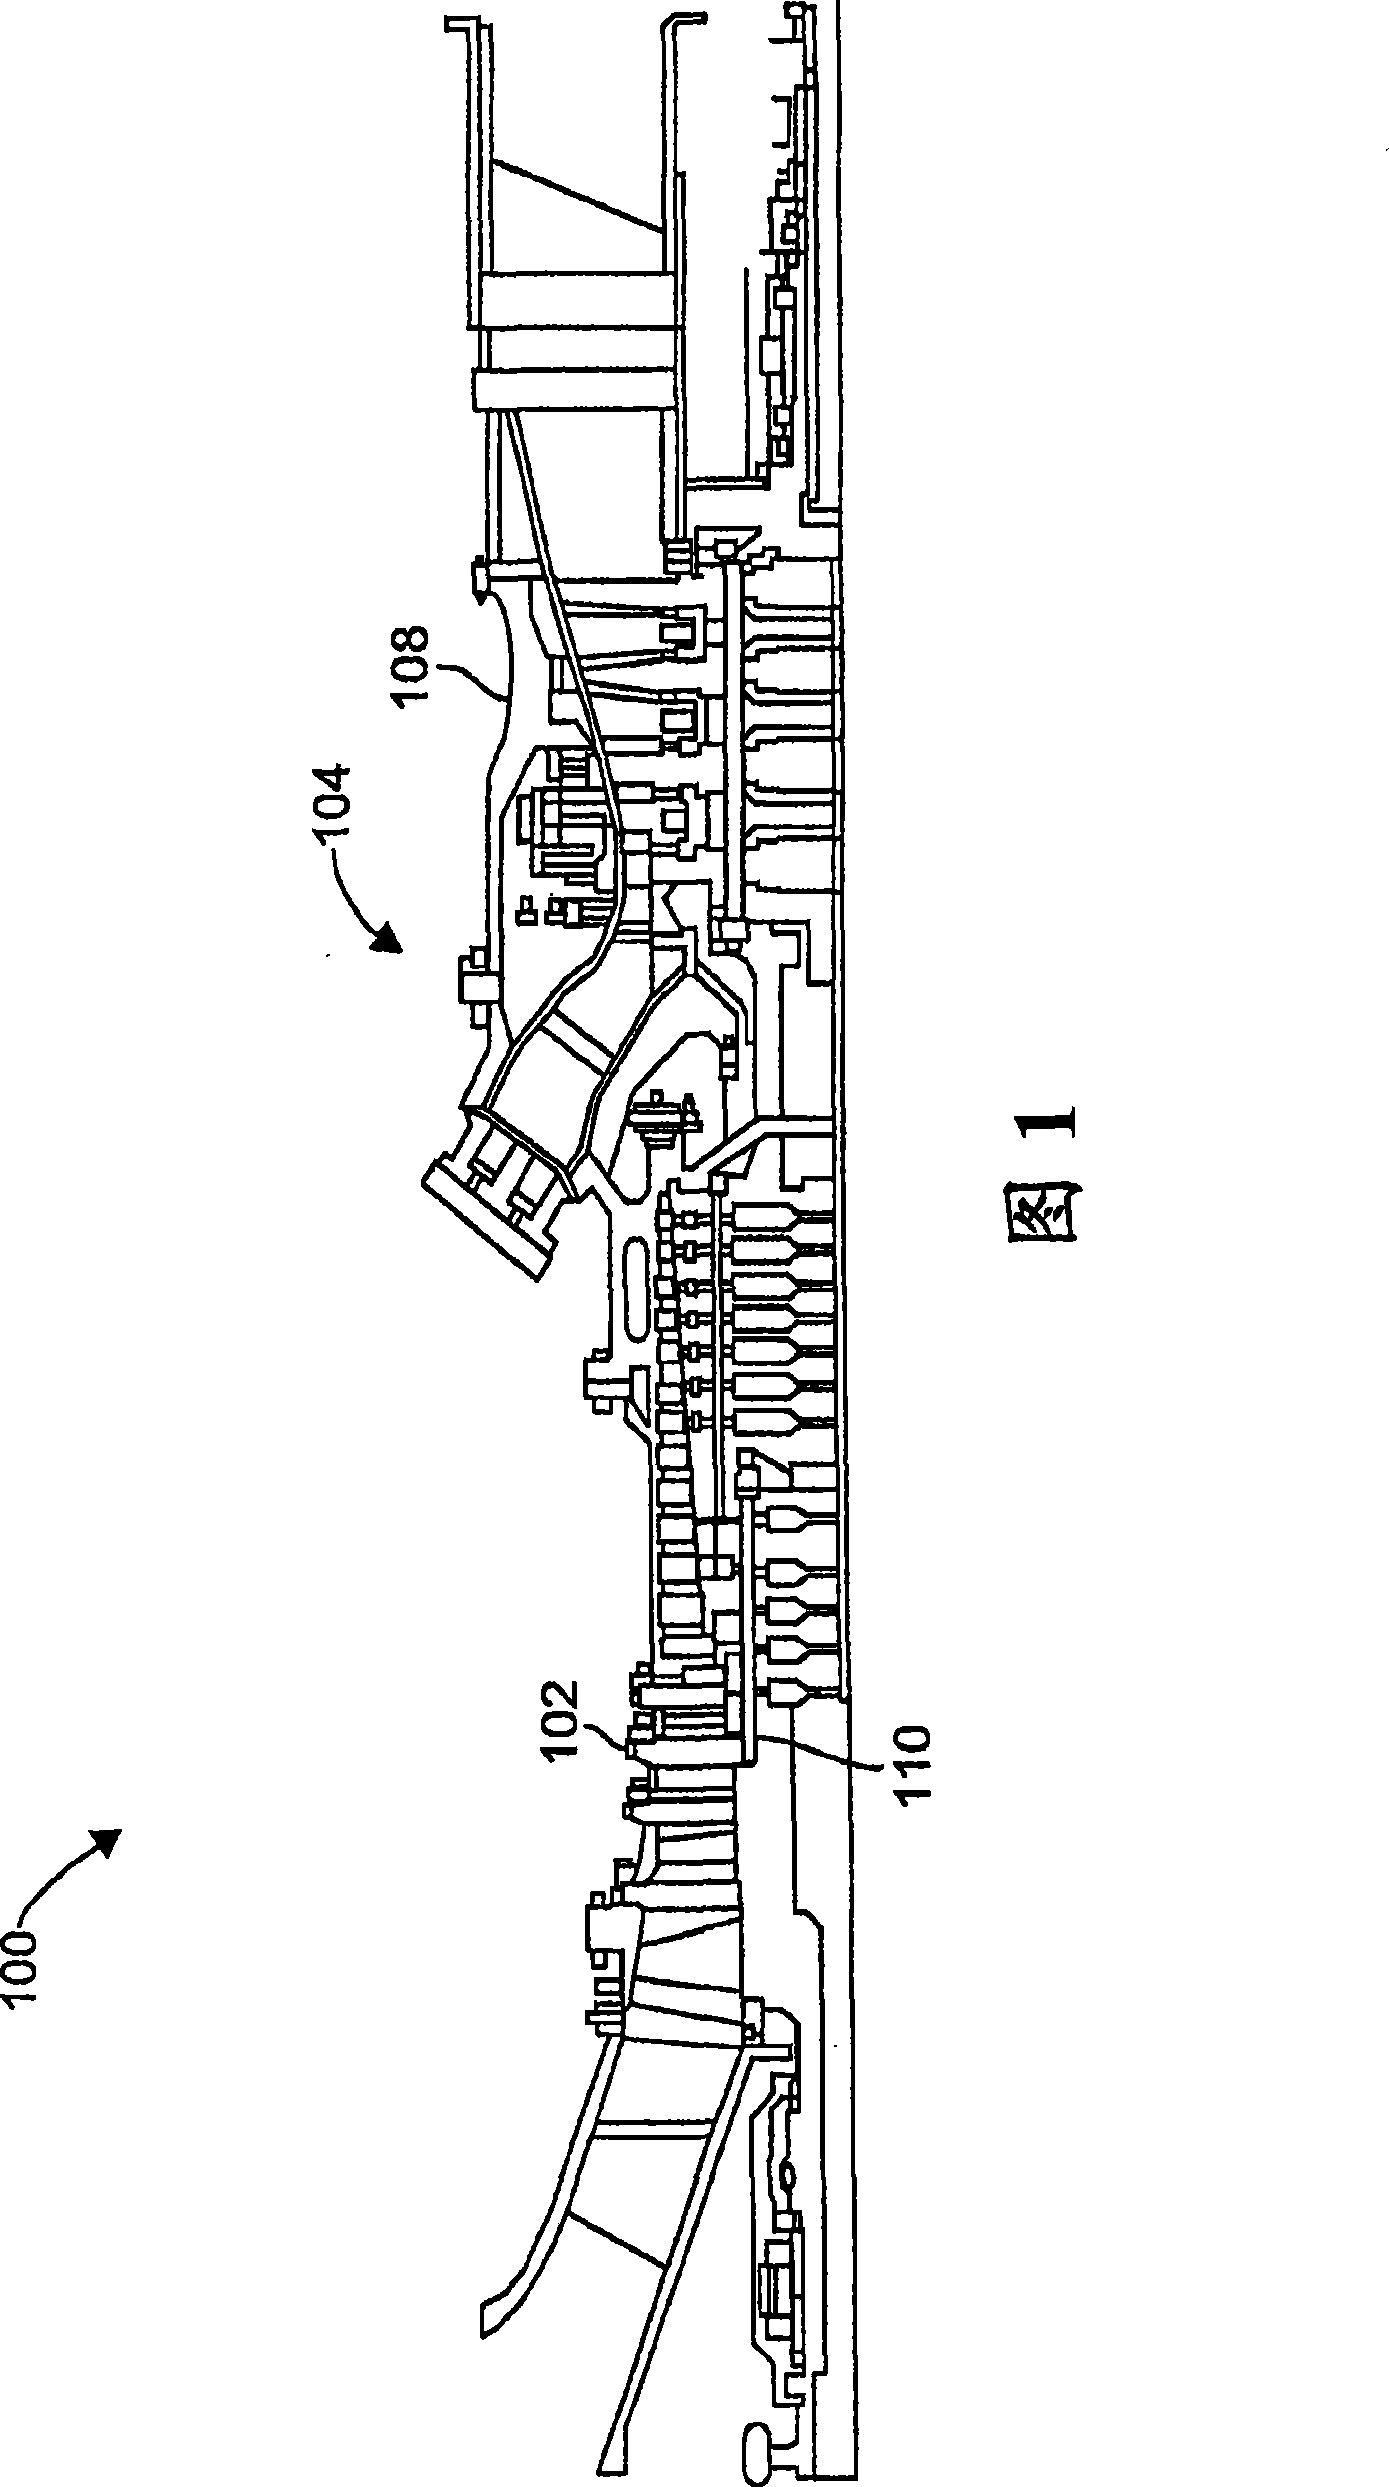 Method and system for controlling gas turbine